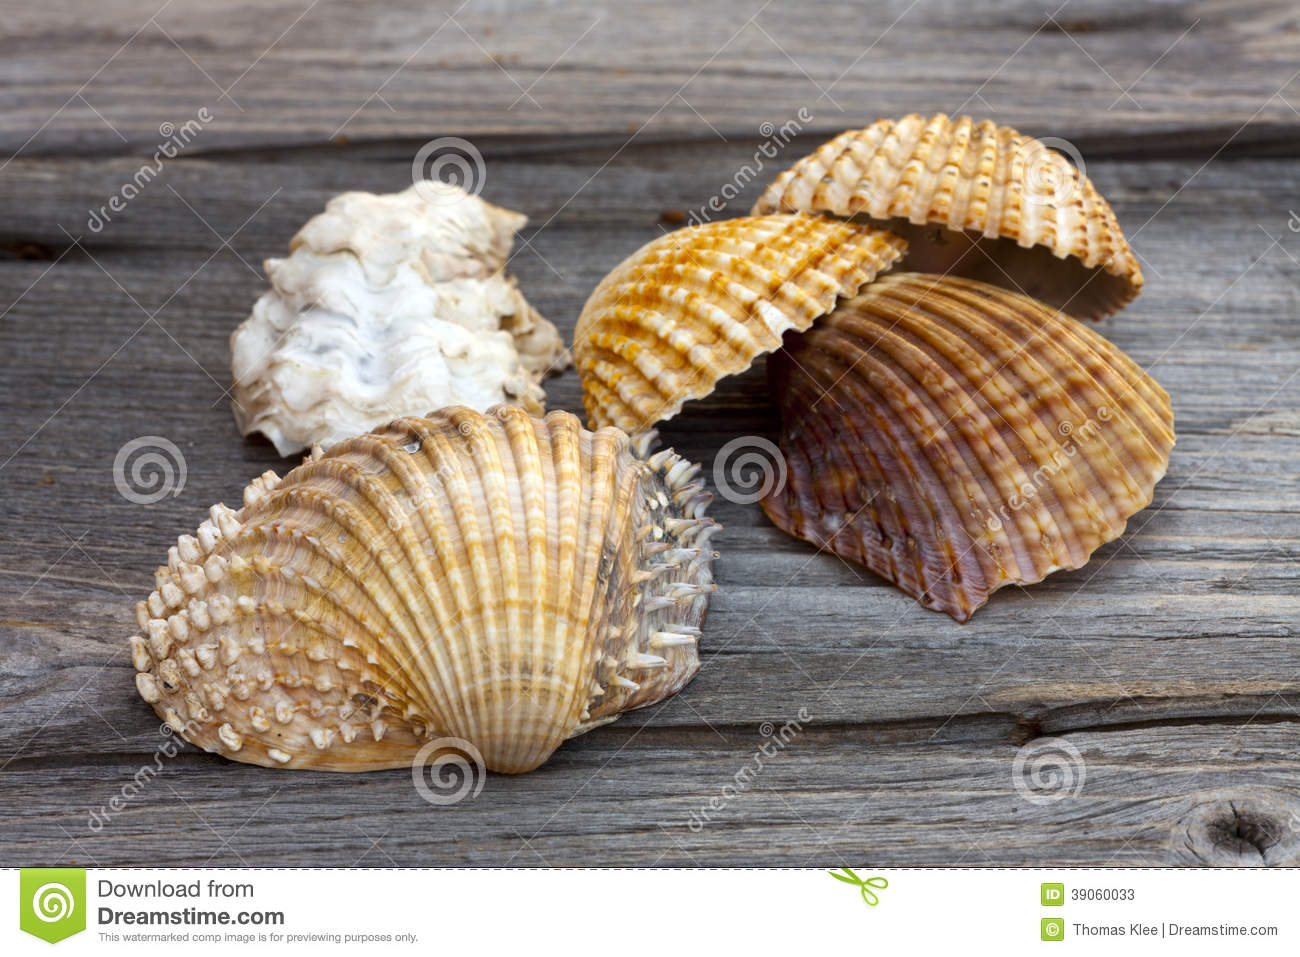 Close Up View Of Sea Shells From The Mediterranean On A Rustic Wooden